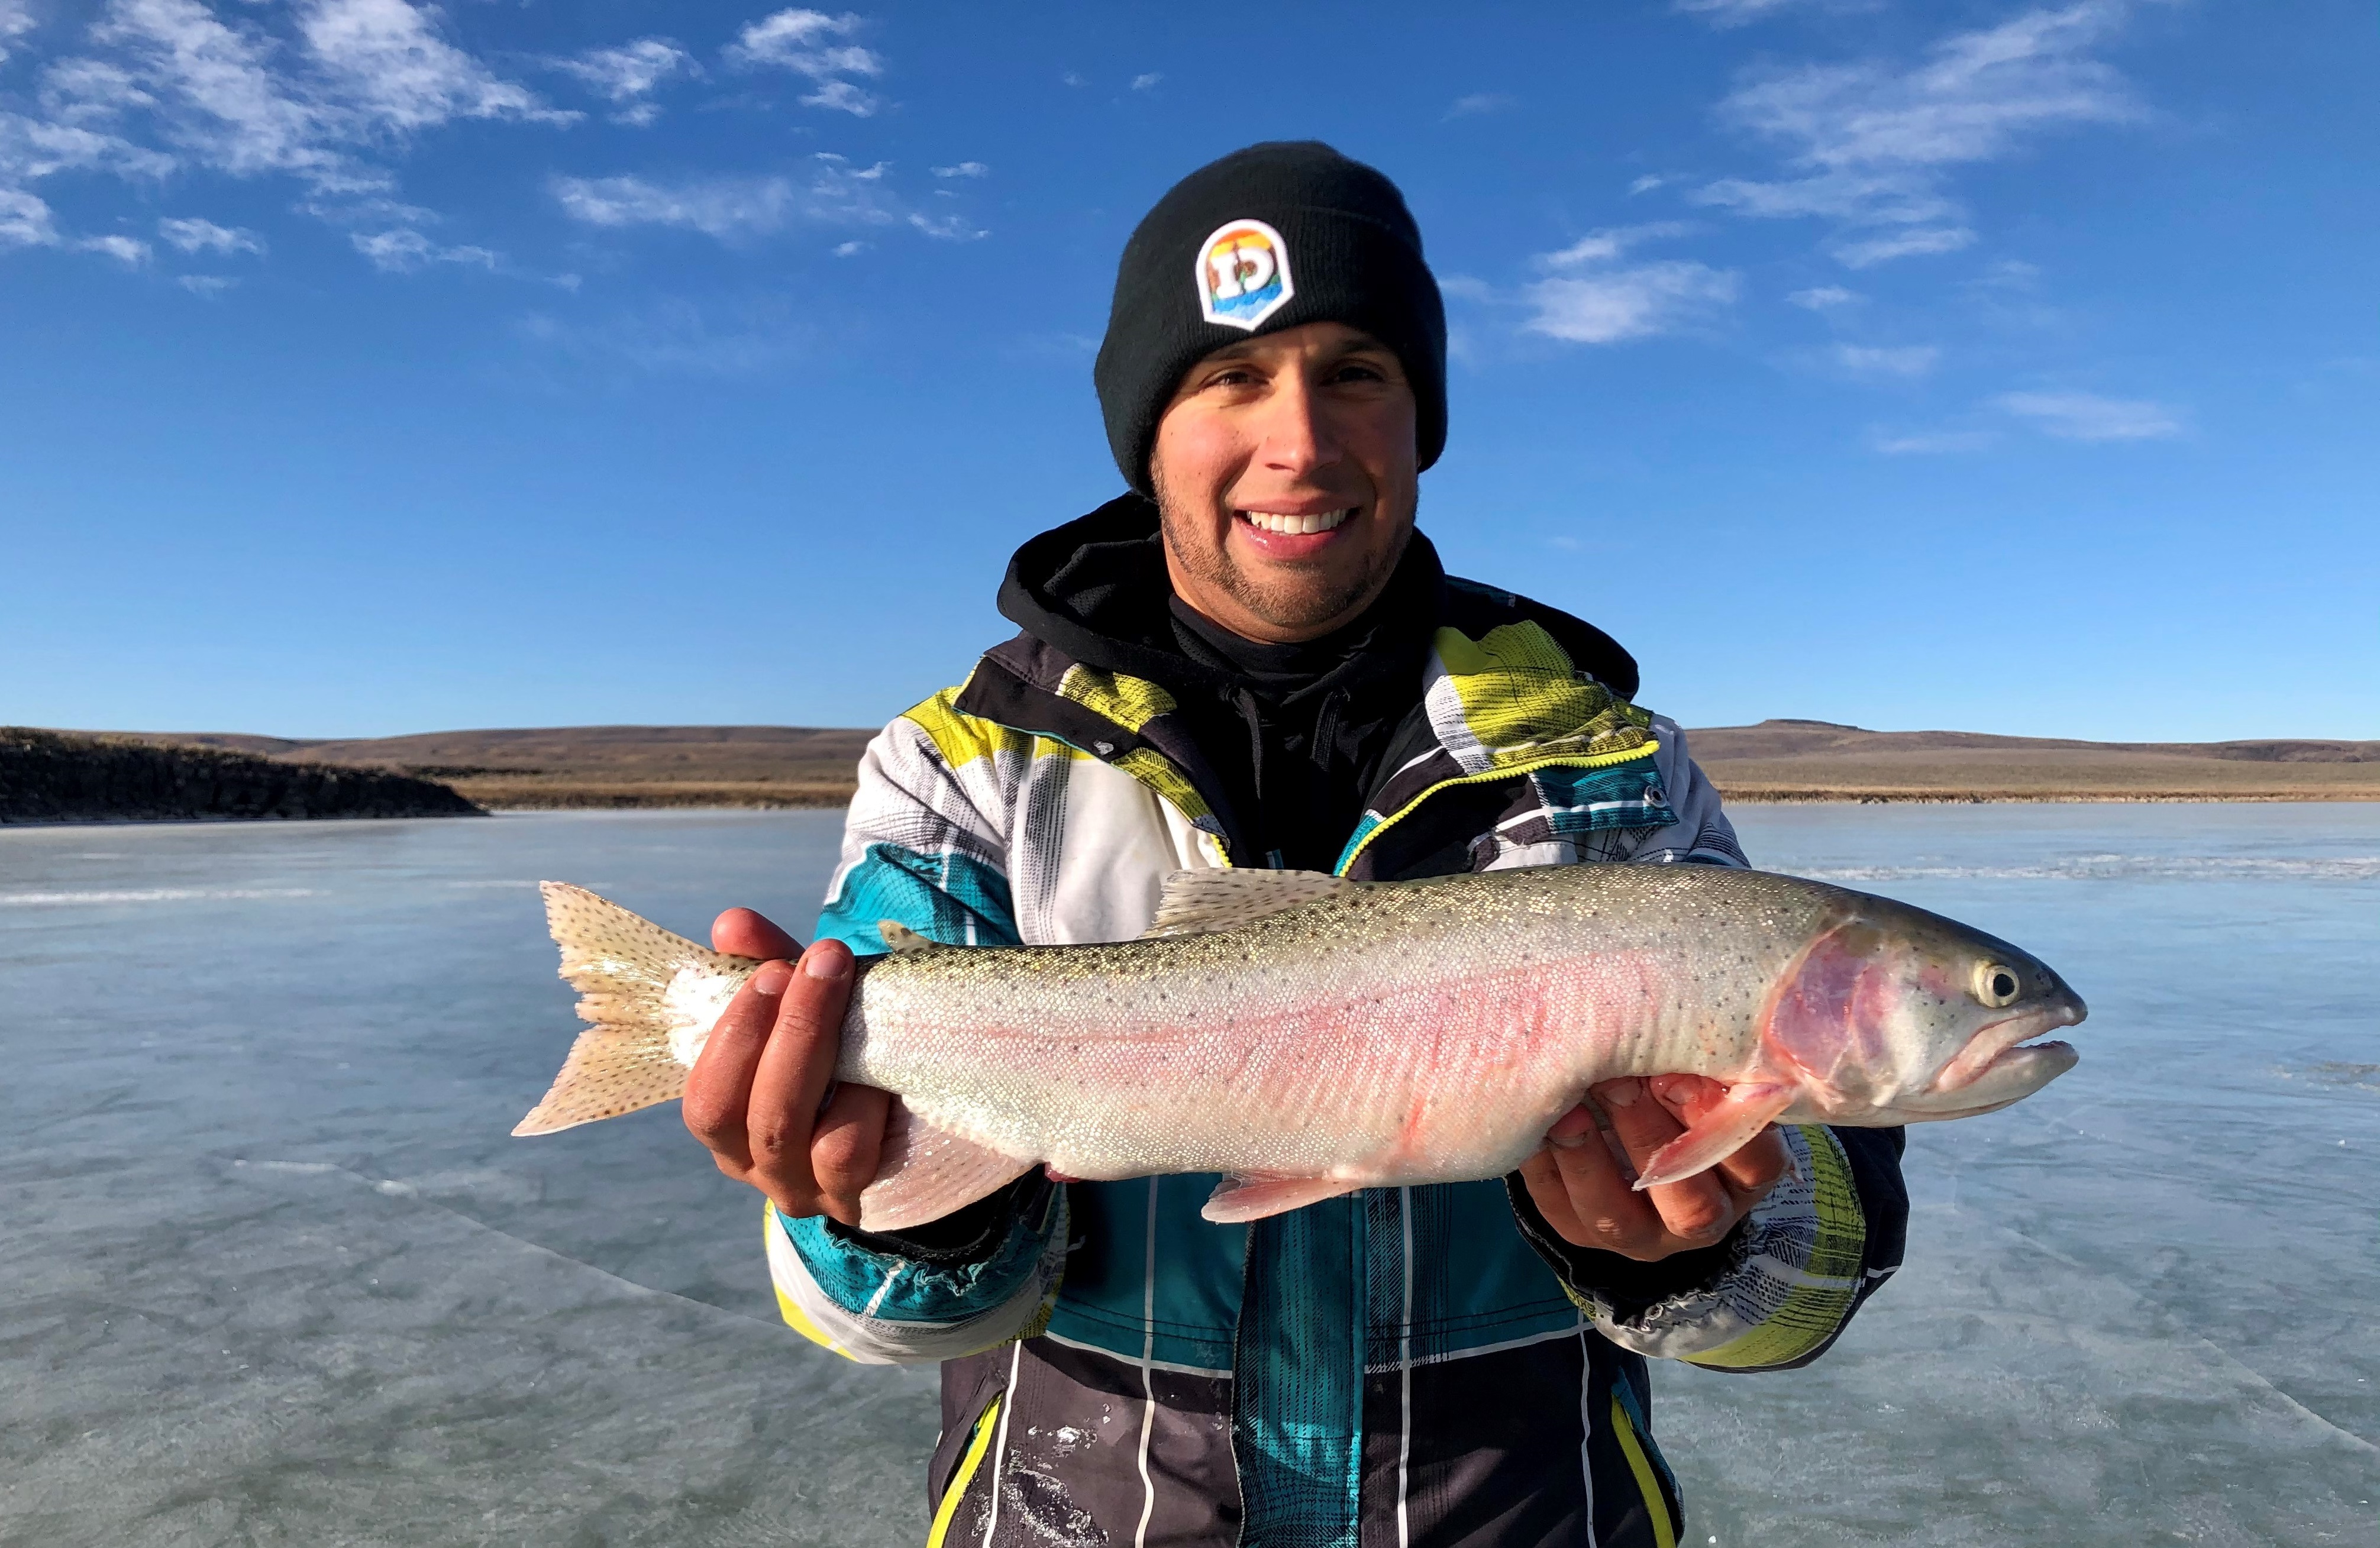 Meridian angler lands new record Lahontan cutthroat trout